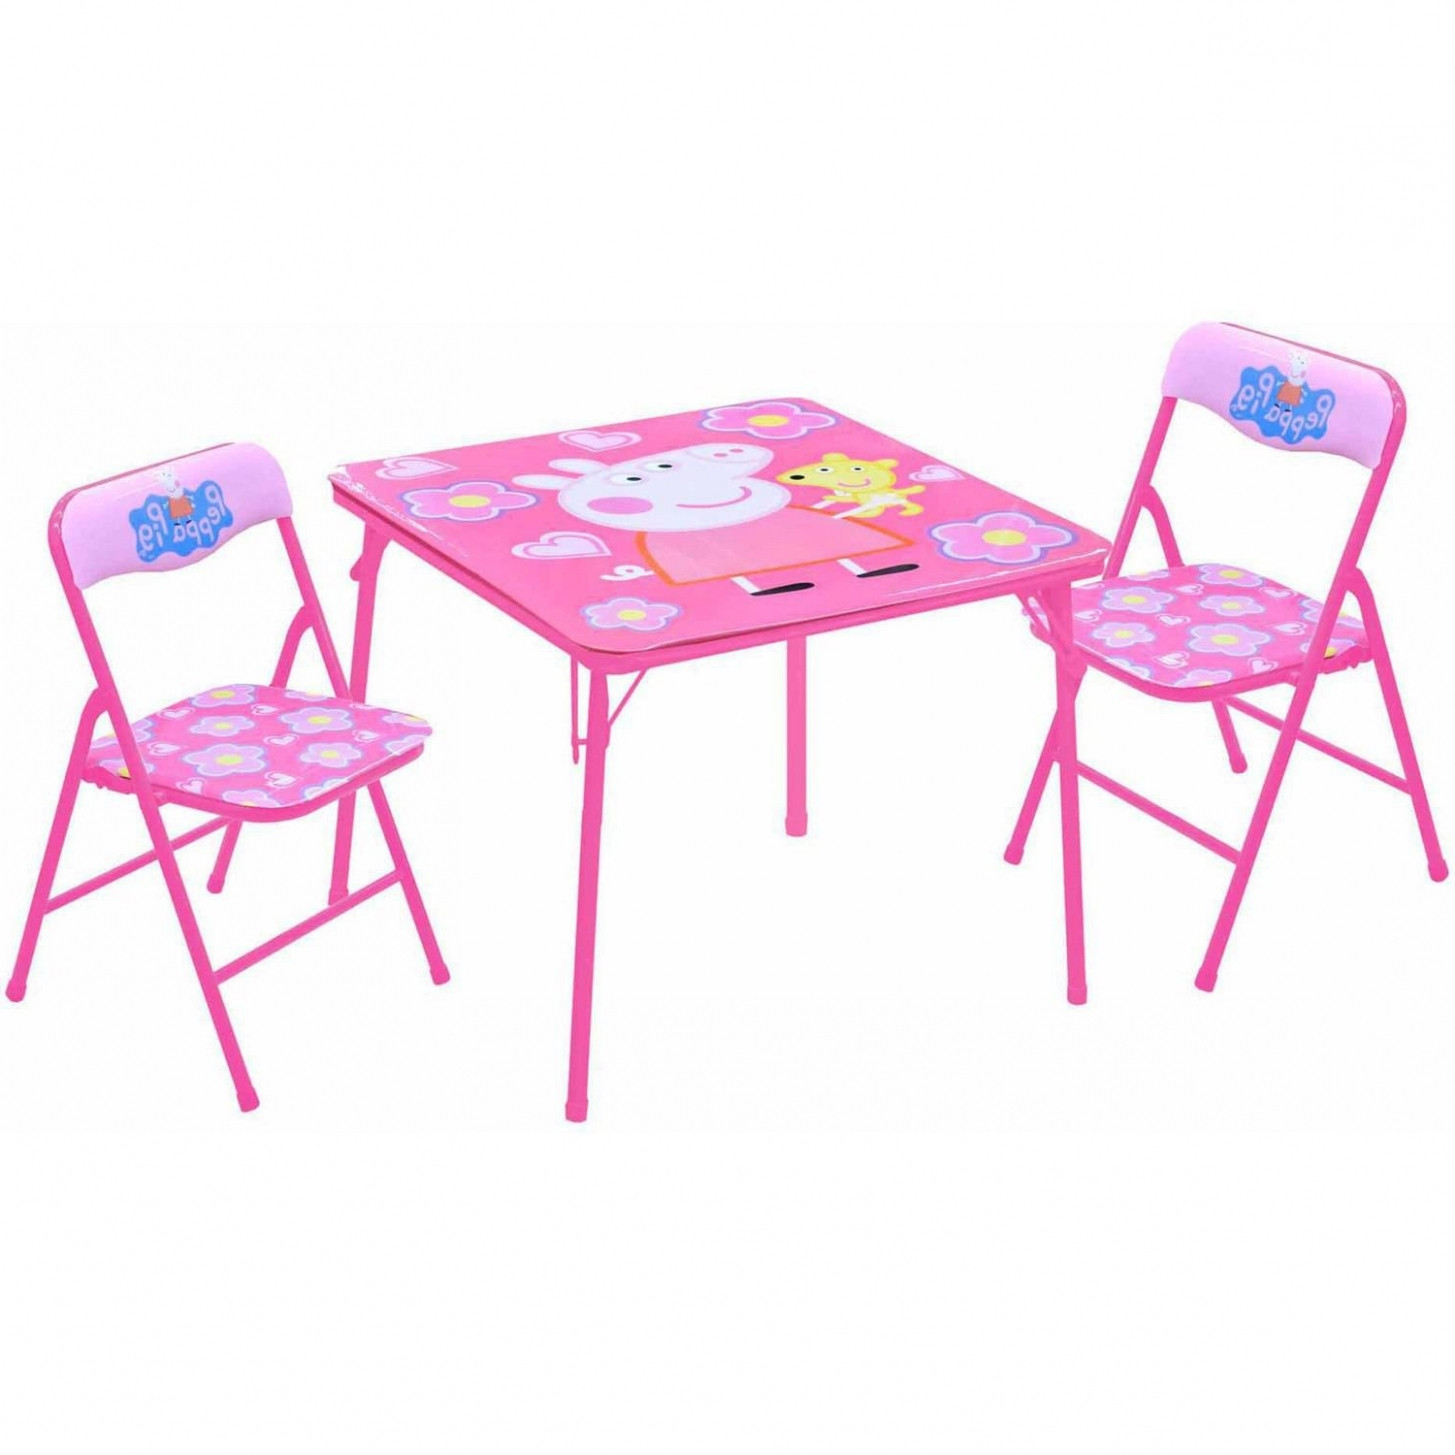 Kids Table And Chairs Target
 25 Collection of Outdoor Folding Chairs Tar